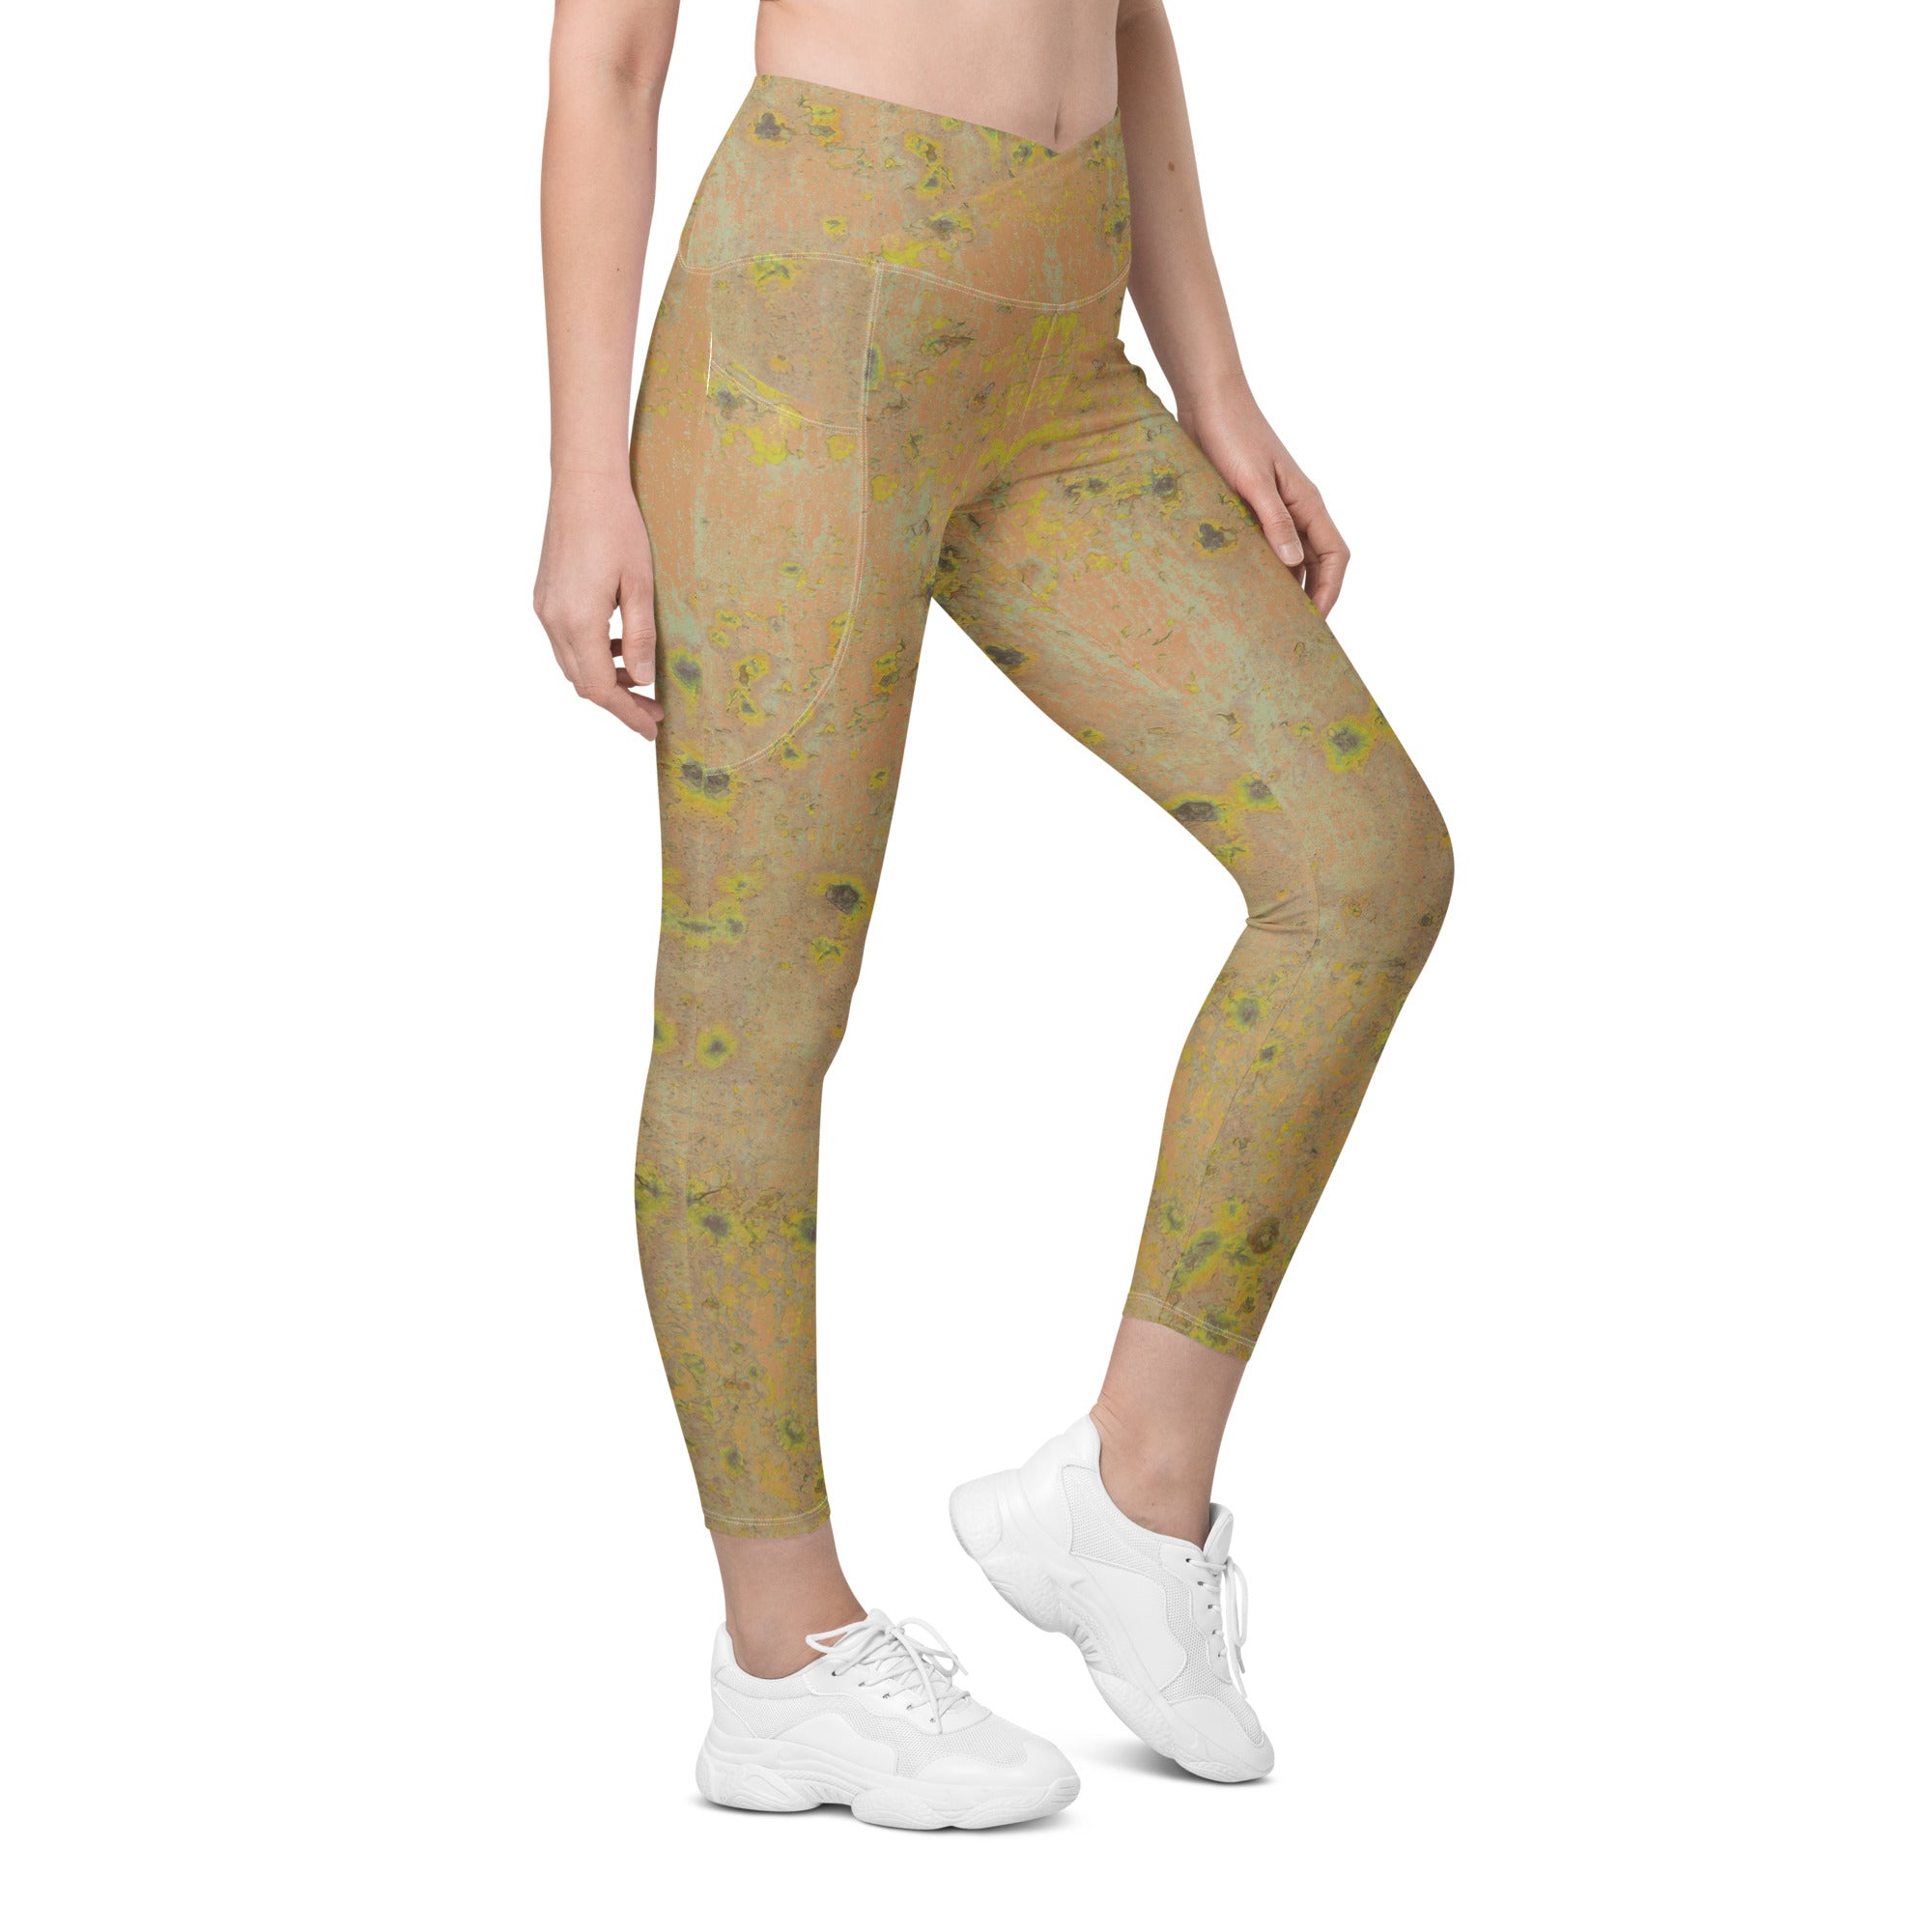 Versatile Marble Print Leggings for Gym and Everyday Use